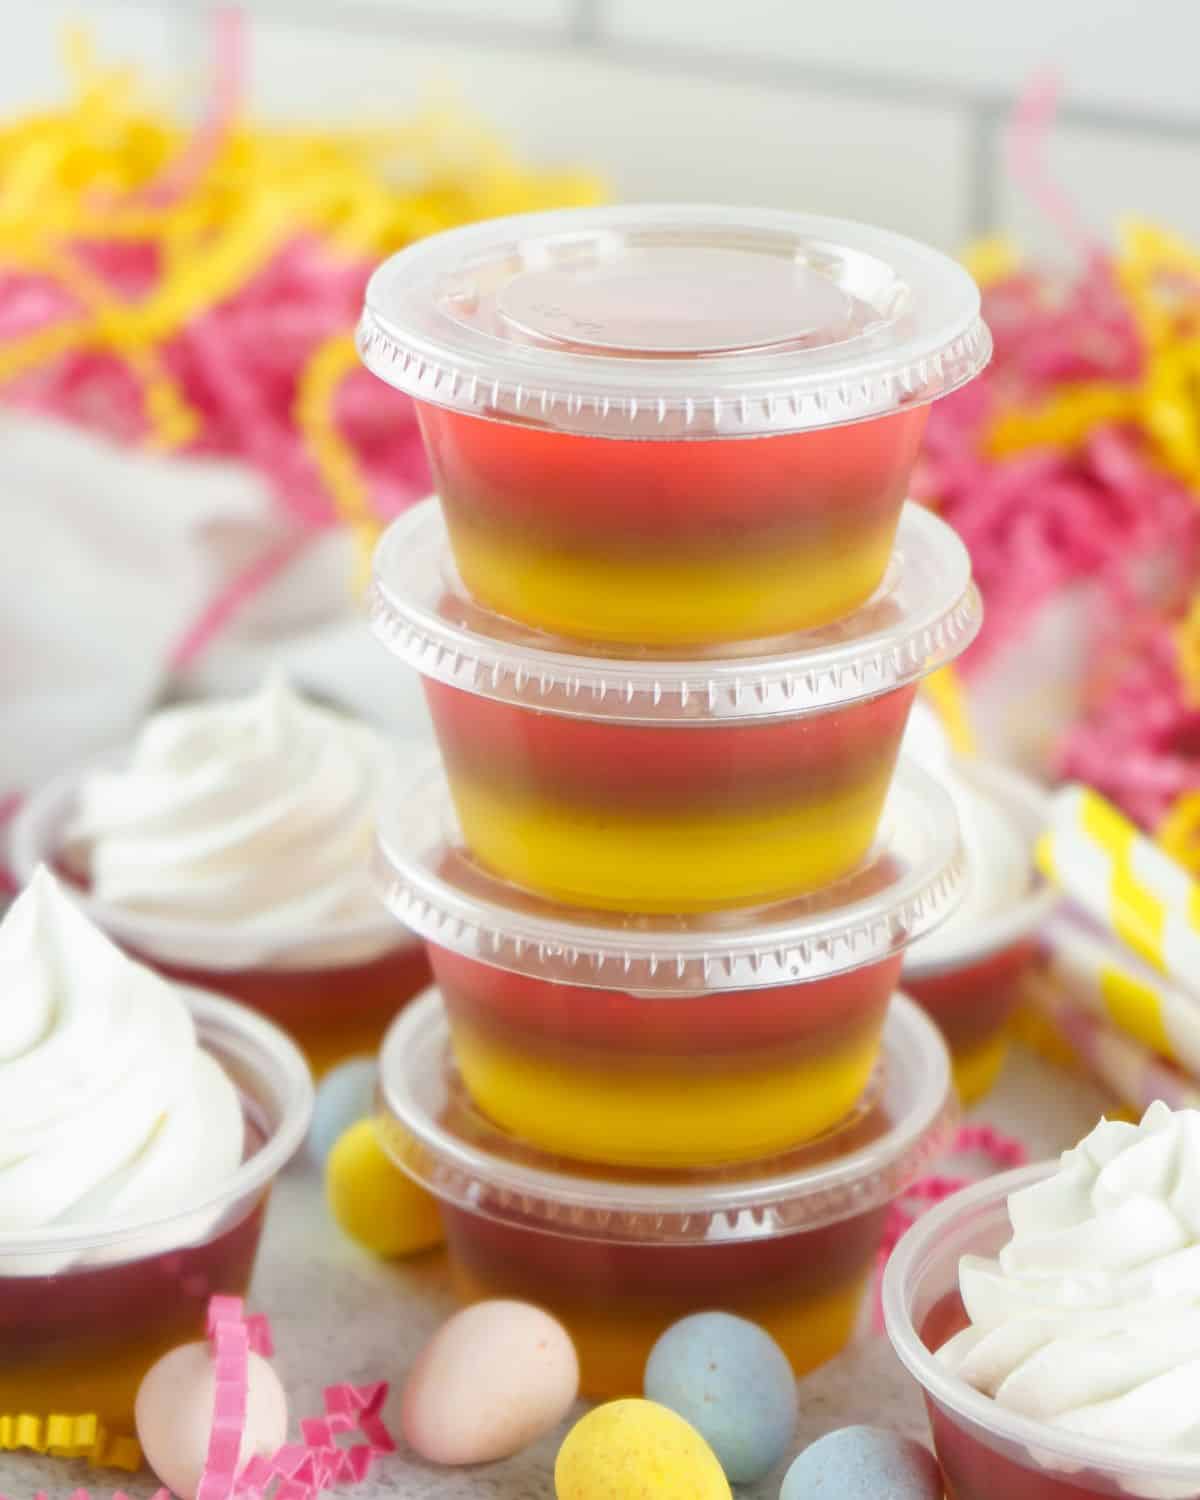 Gelatin shots for Easter in spring colors. 